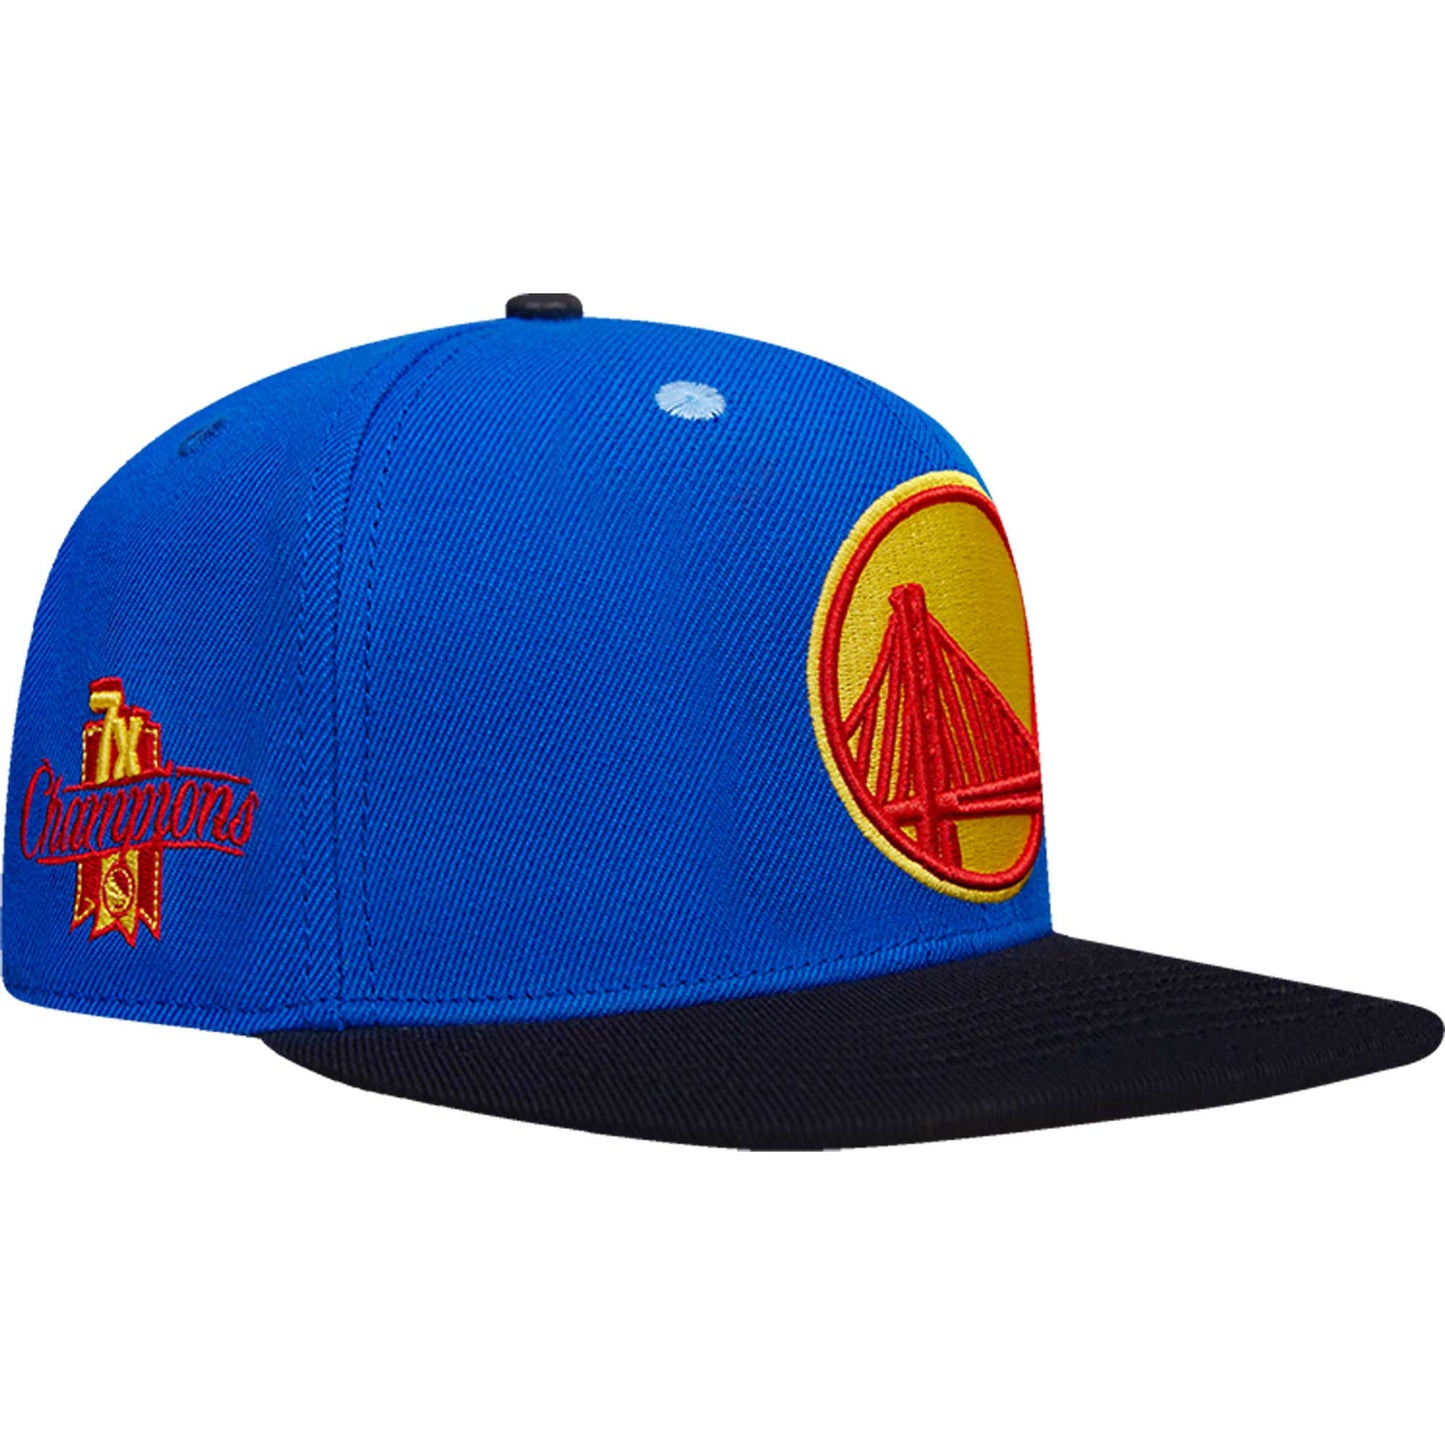 Golden State Warriors Pro Standard 7X NBA Finals Champions Any Condition Snapback Hat - Royal